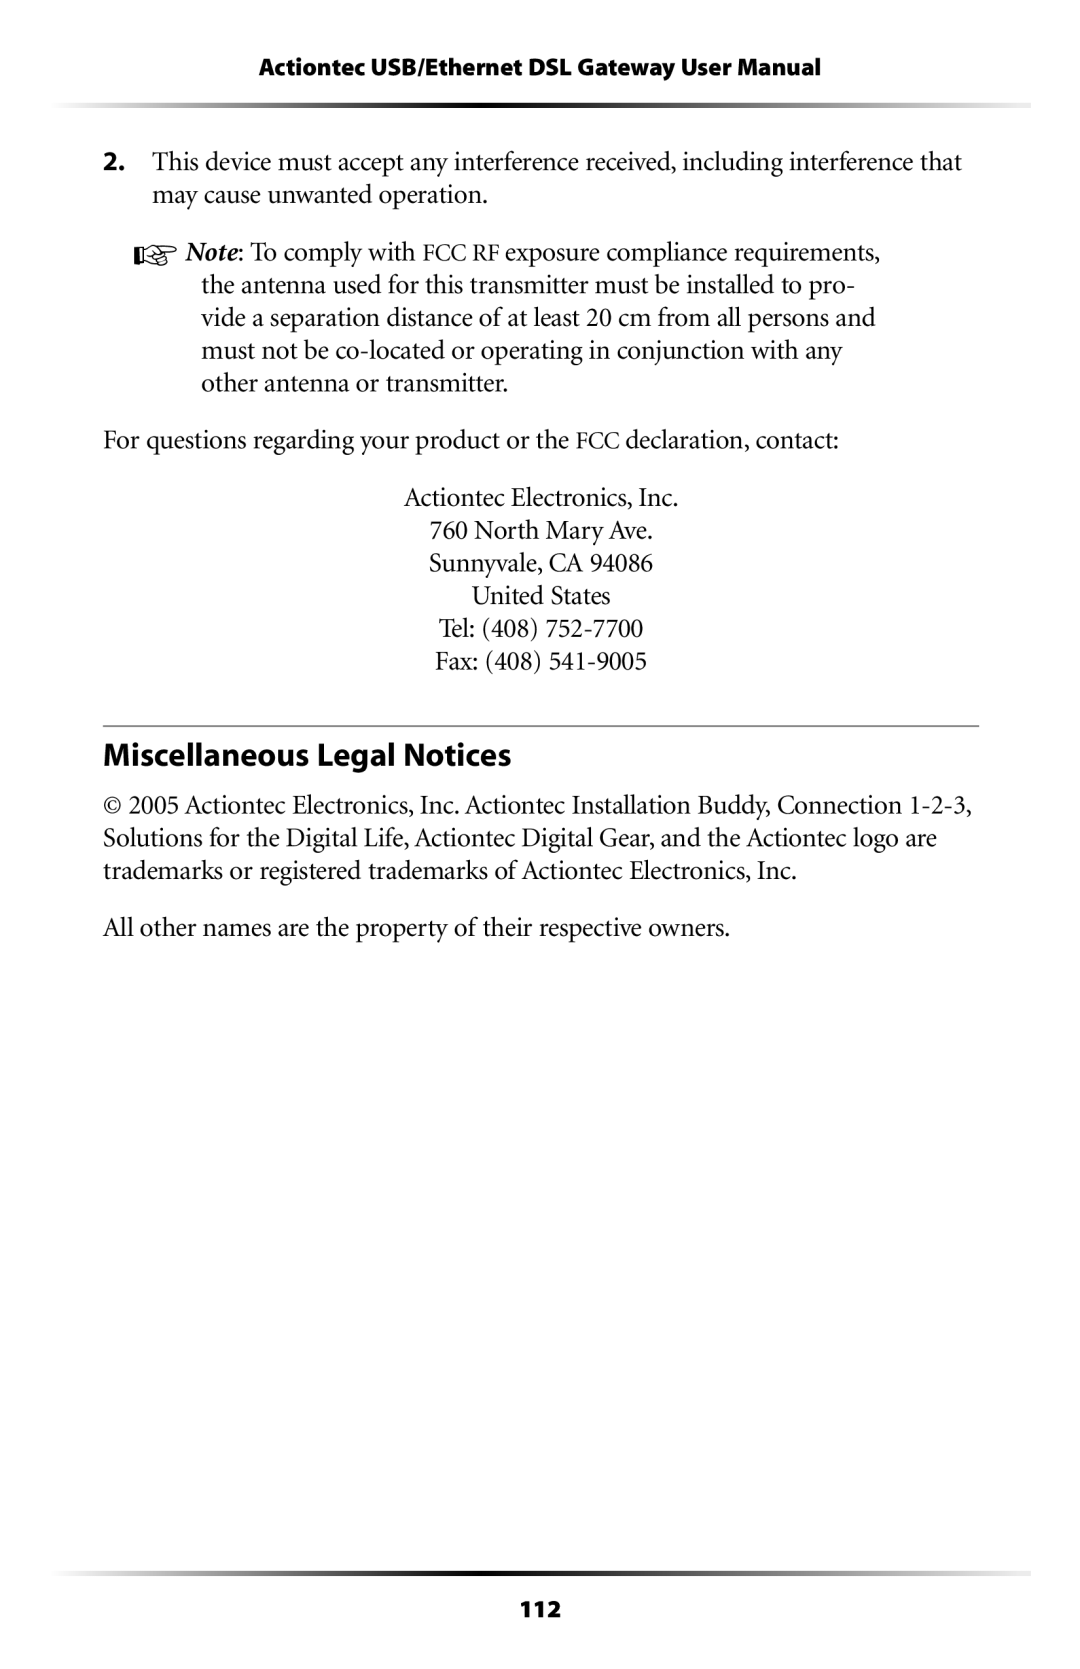 Gateway GT704 user manual Miscellaneous Legal Notices 